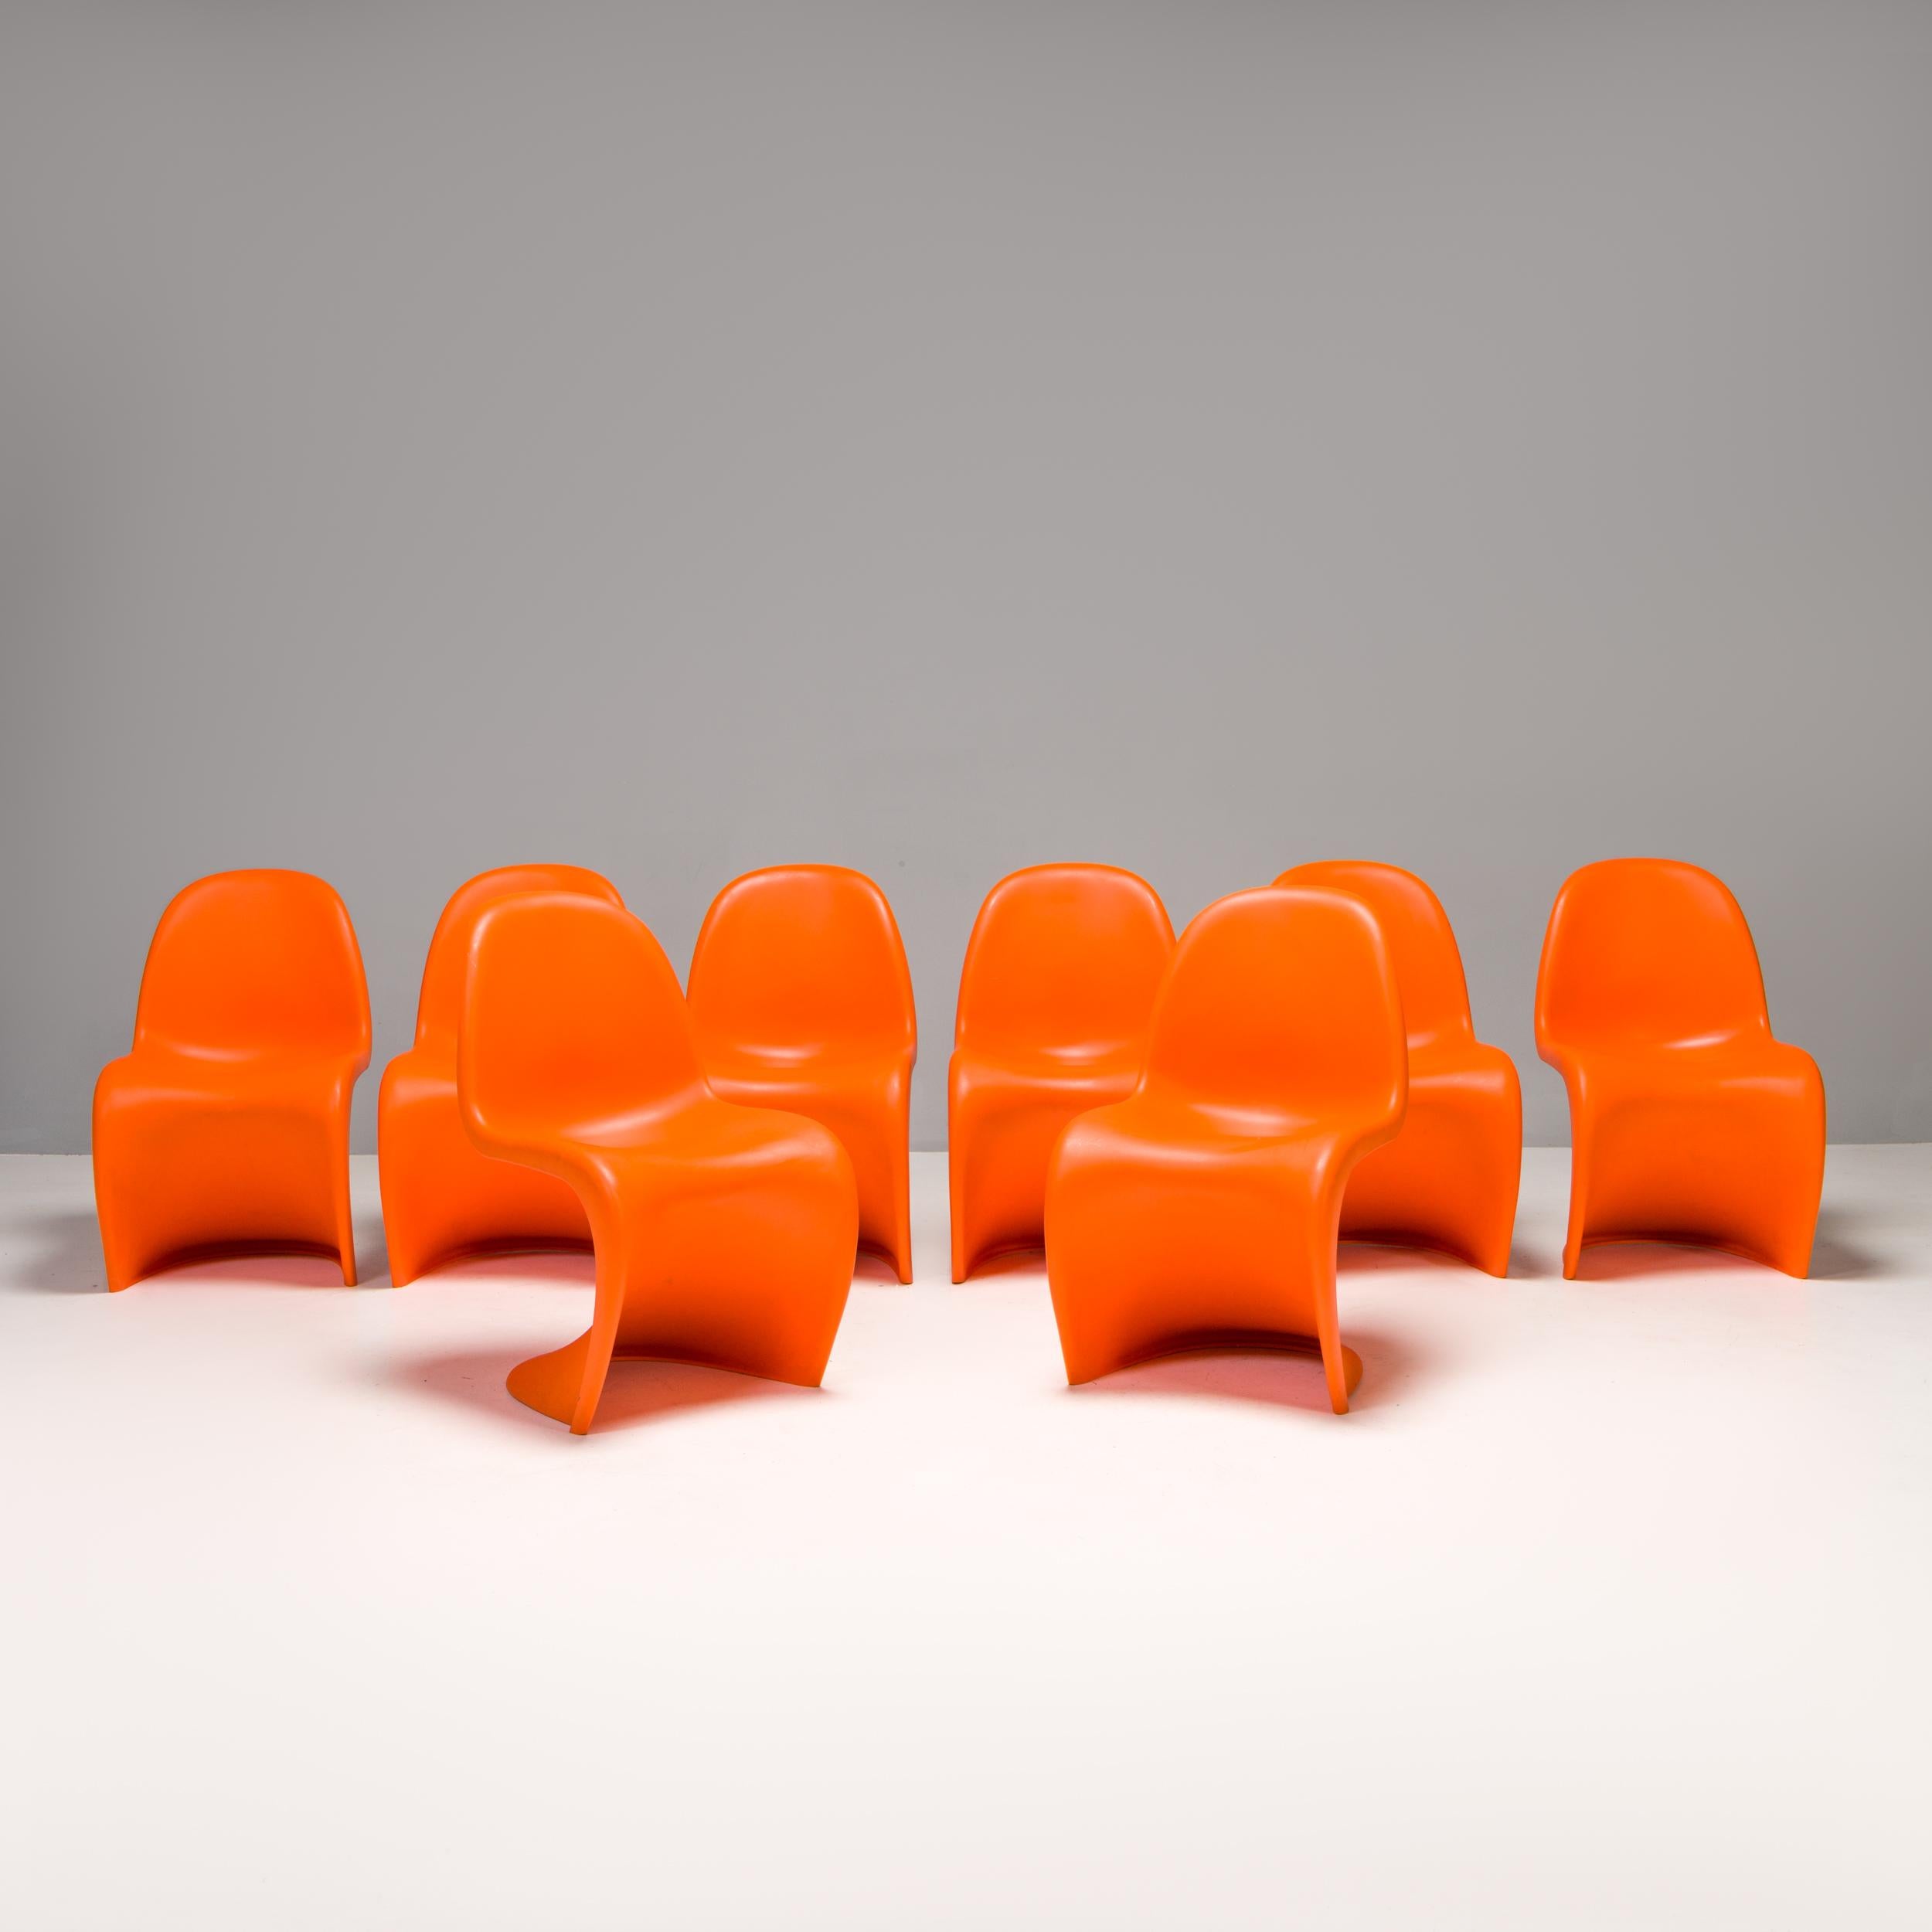 The Panton chair was designed by Verner Panton in 1960 and developed for production with Vitra in 1967, making history as the first chair to be manufactured in a single piece from plastic.

The most recent iteration was created in 1999 and the